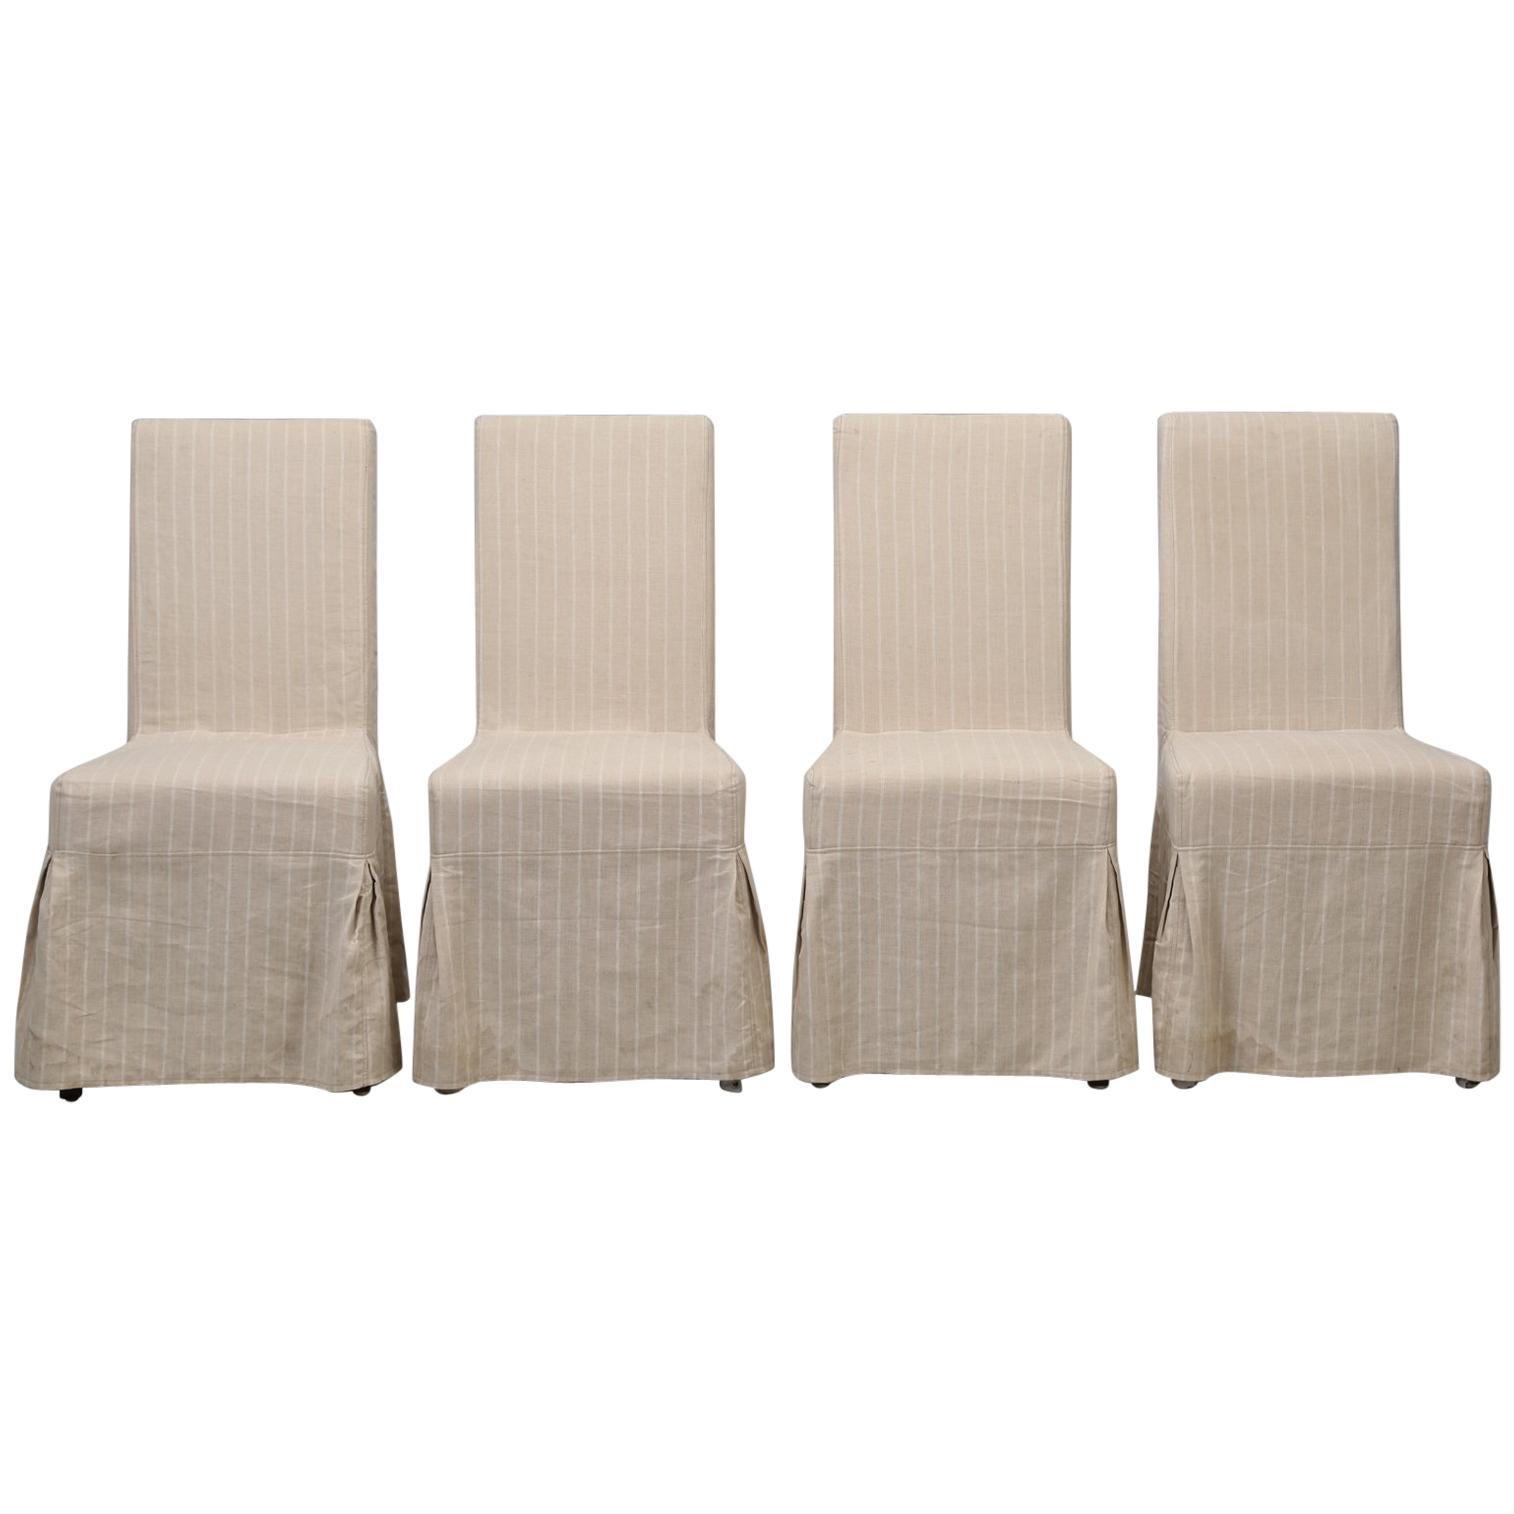 Comfortable Slipcovered Chairs, Set of 4